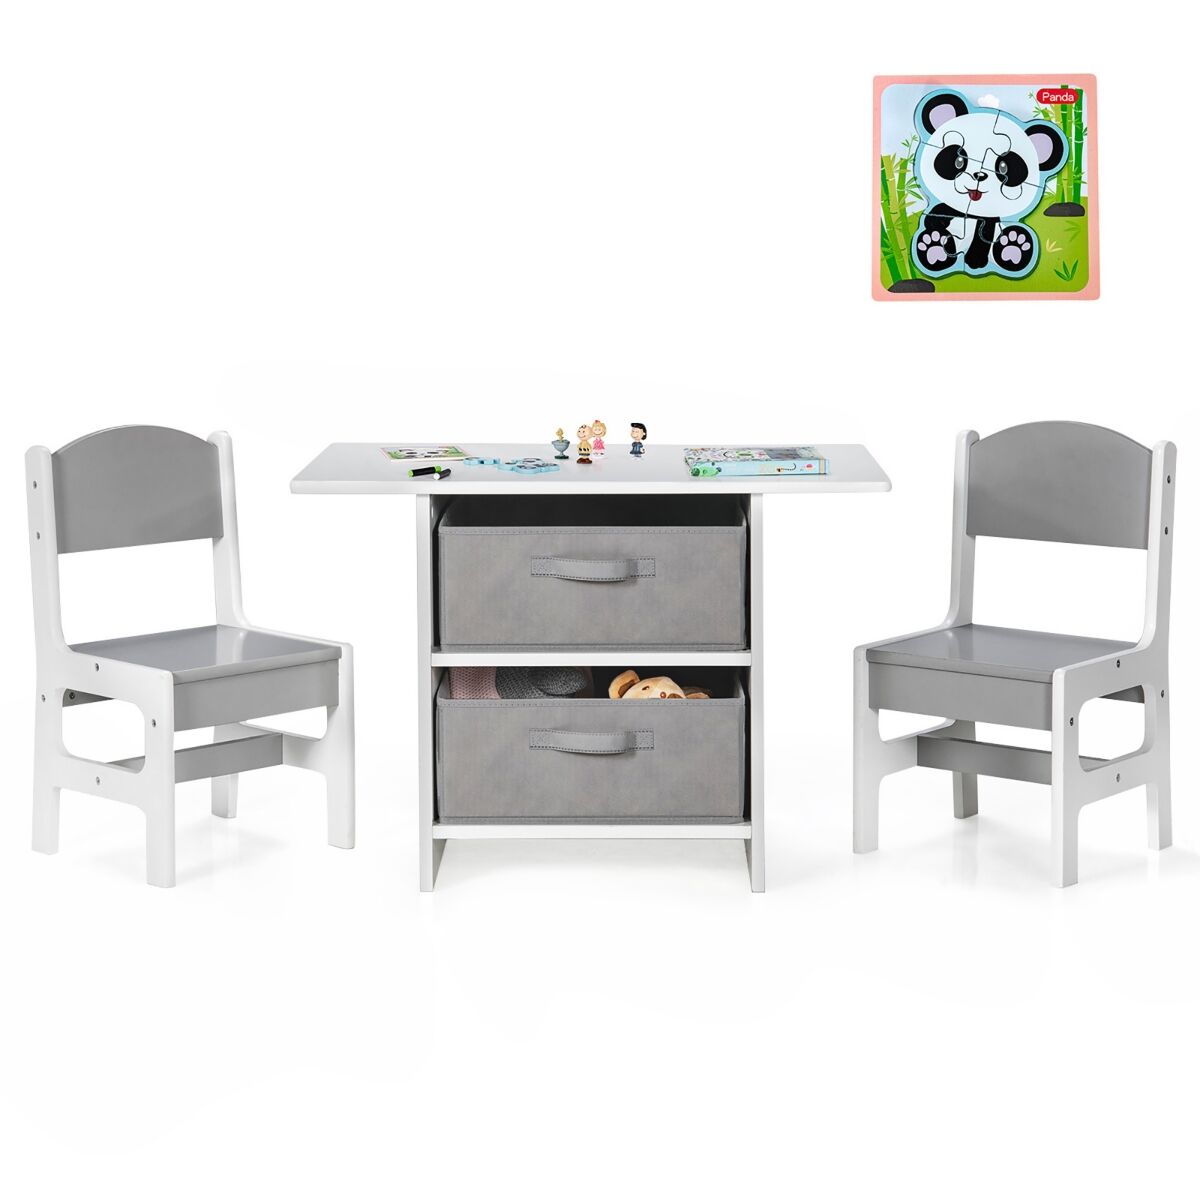 Costway Kids Art Play Wood Table and 2 Chairs Set w/ Storage Baskets Puzzle - Grey